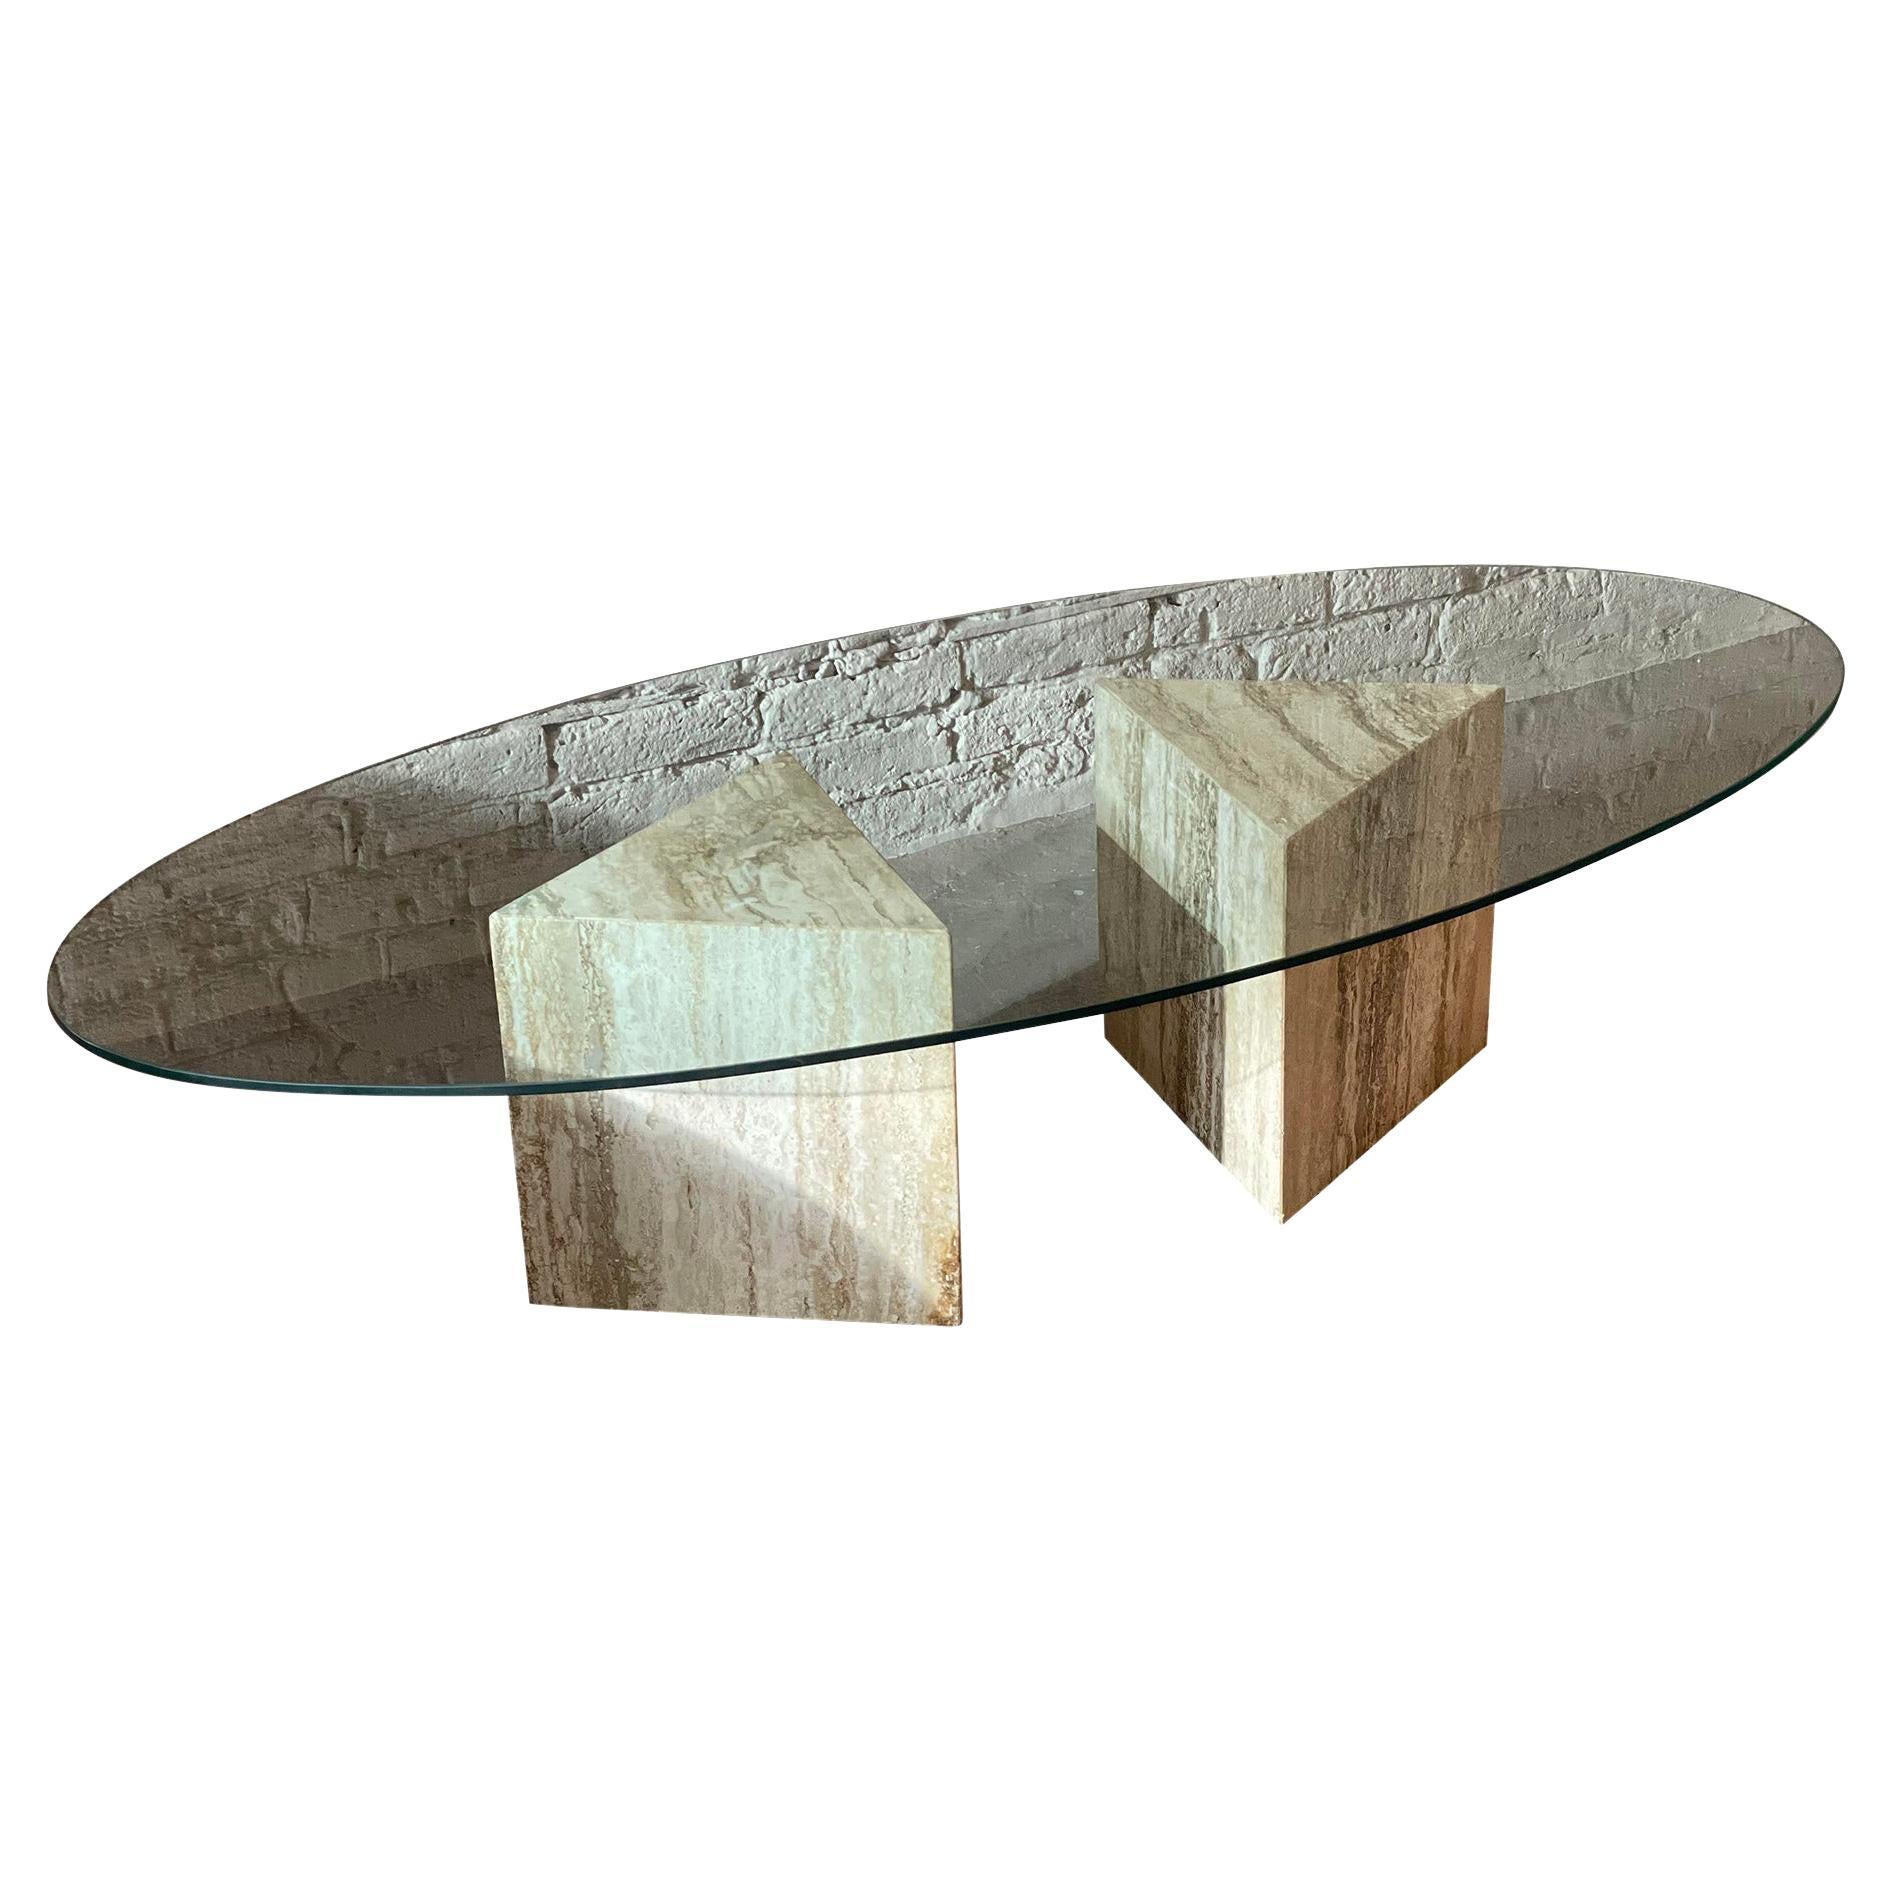 1980s Postmodern Triangle Base Travertine Coffee Table, Made in Italy